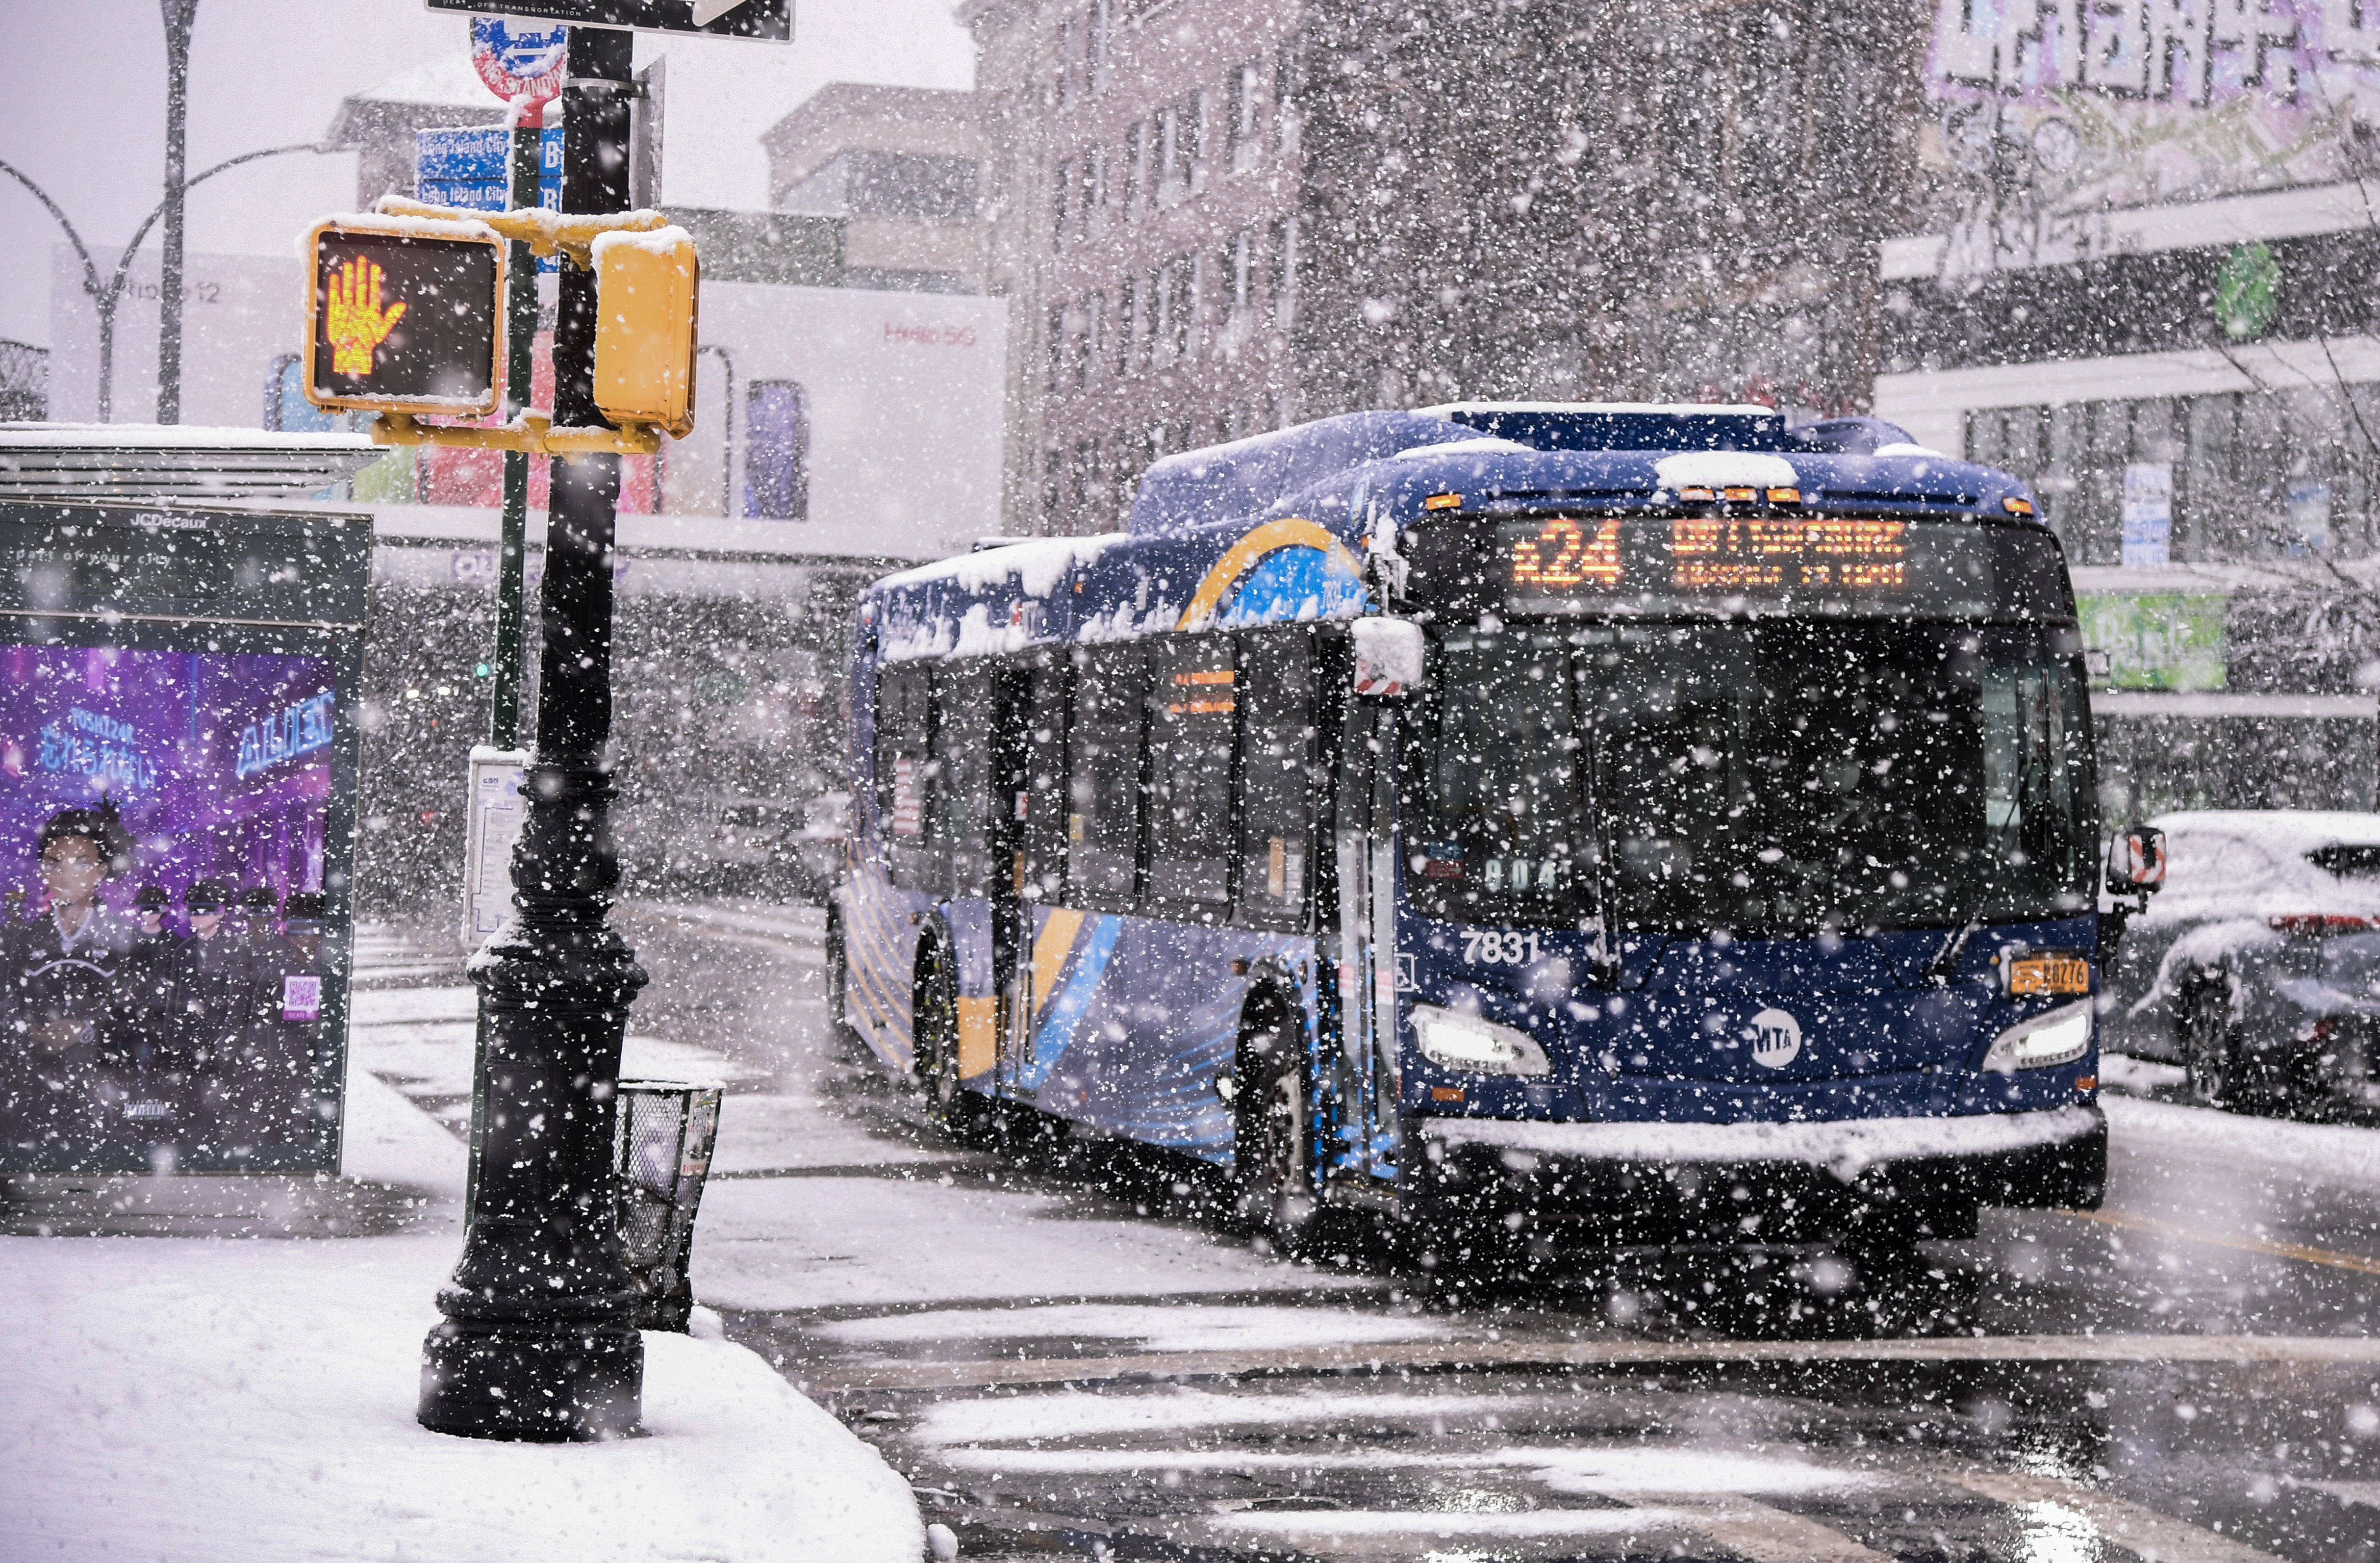 Photos: MTA Operating in Winter Snowstorm Without Weather-Related Service Changes